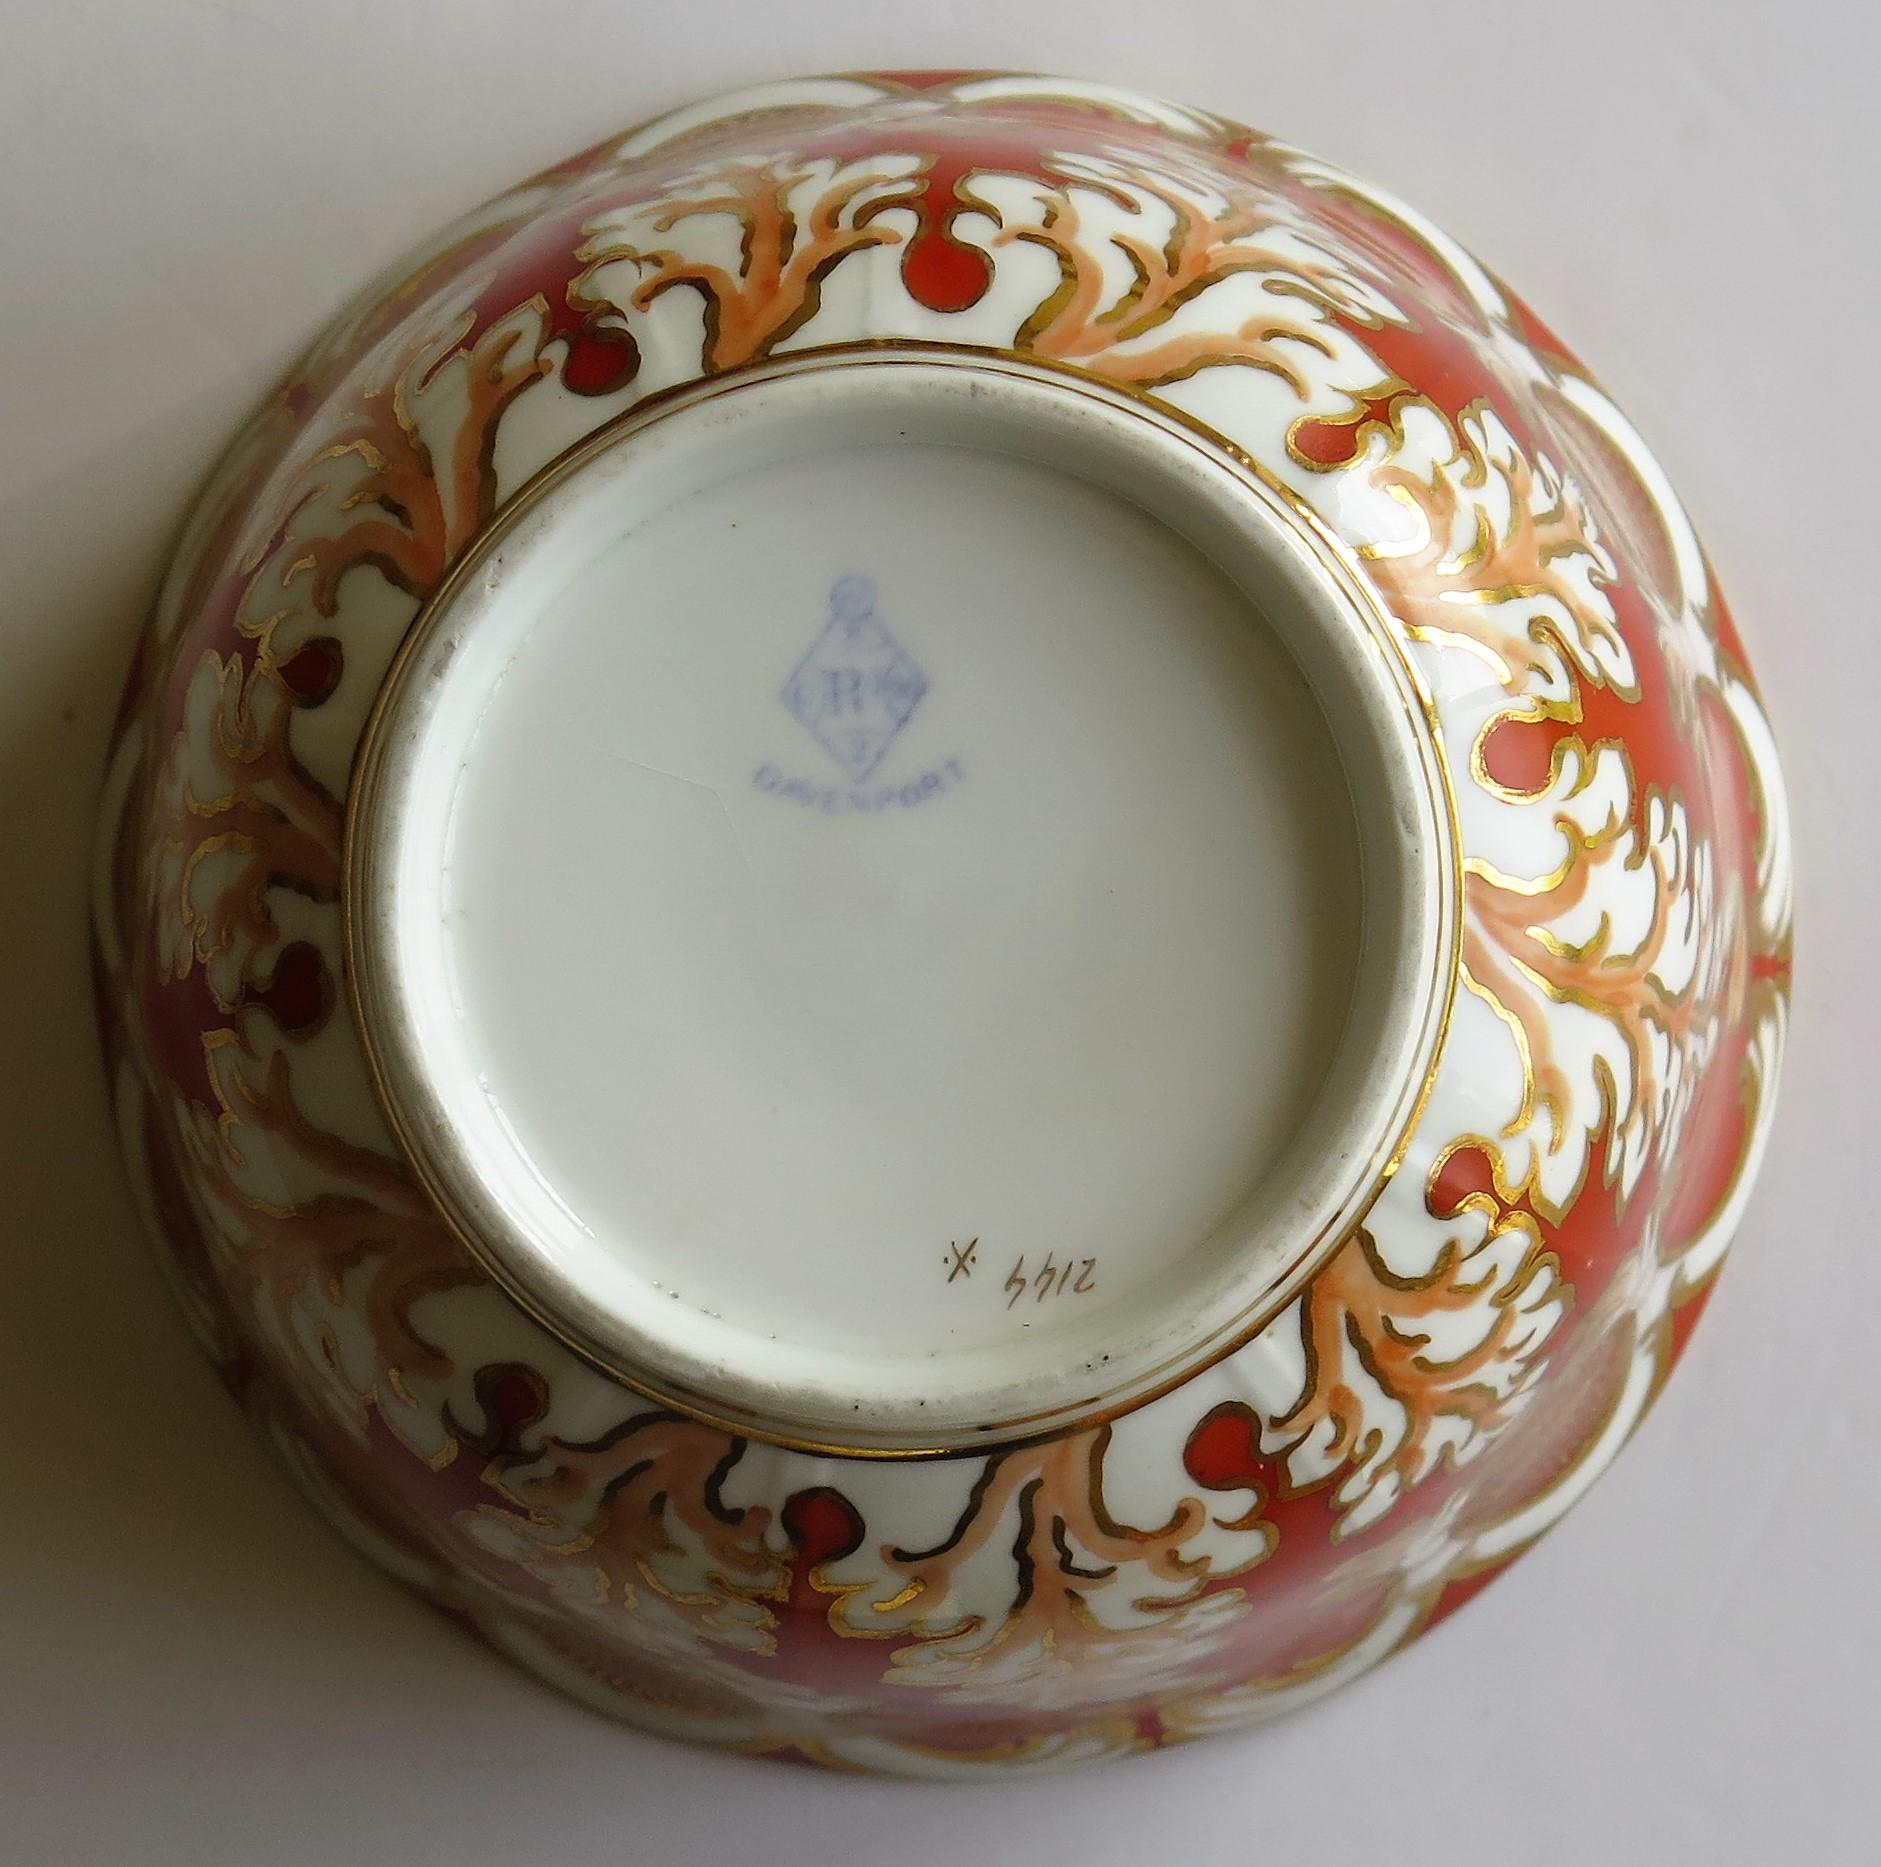 Davenport Porcelain Bowl in Pattern 2144 Fully Marked to Base, English, 1845 10